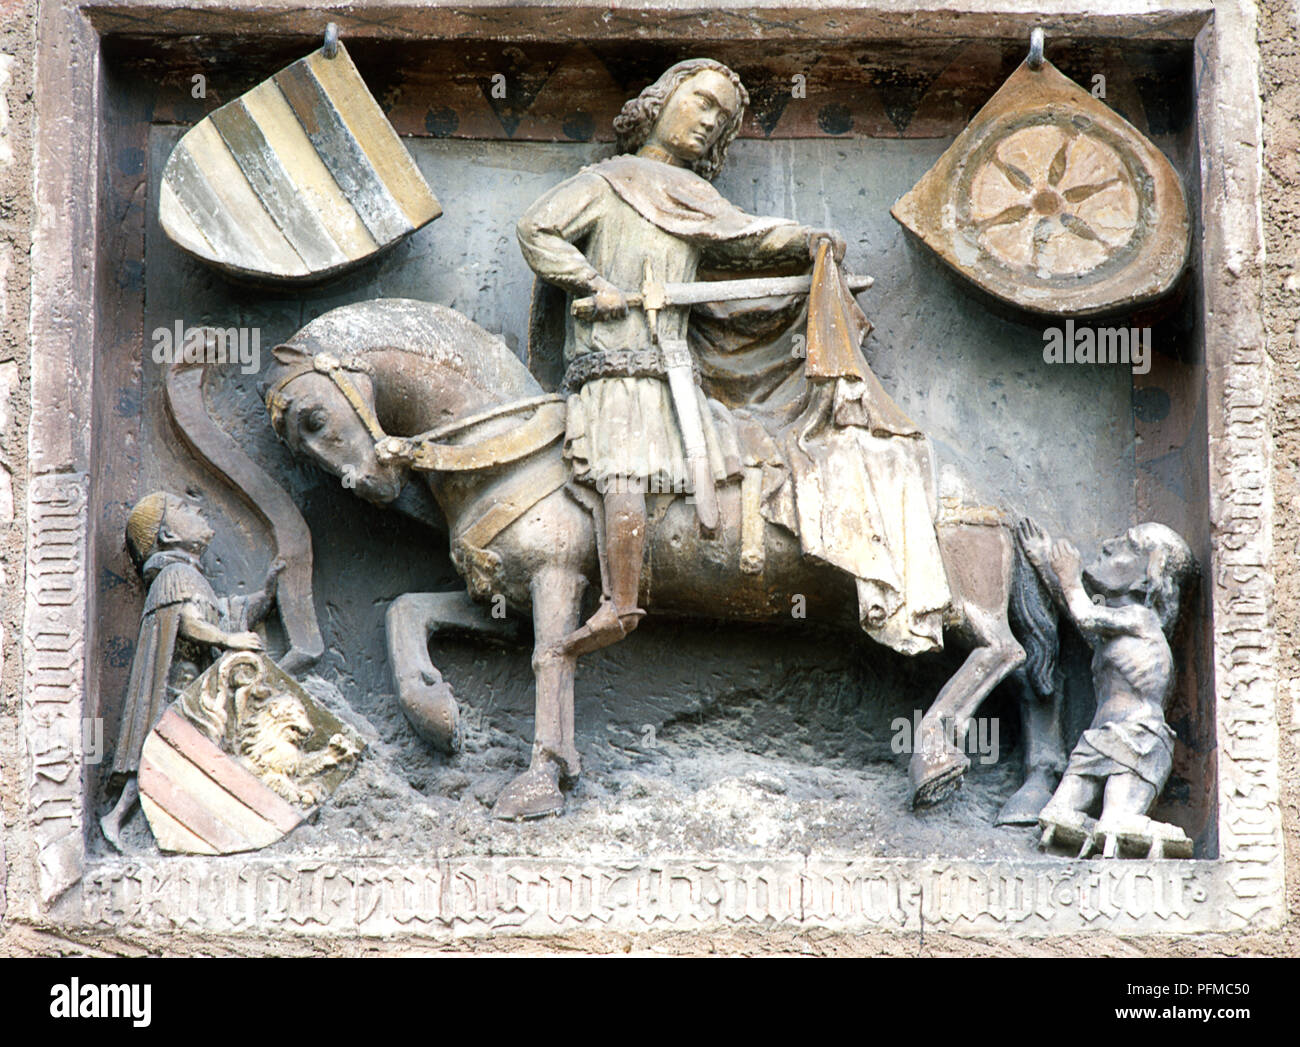 Germany, Hesse, Fritzlar, relief statue of St Martin on horse surrounded by beggars, on the walls of the medieval town hall, built c. 12th century Stock Photo